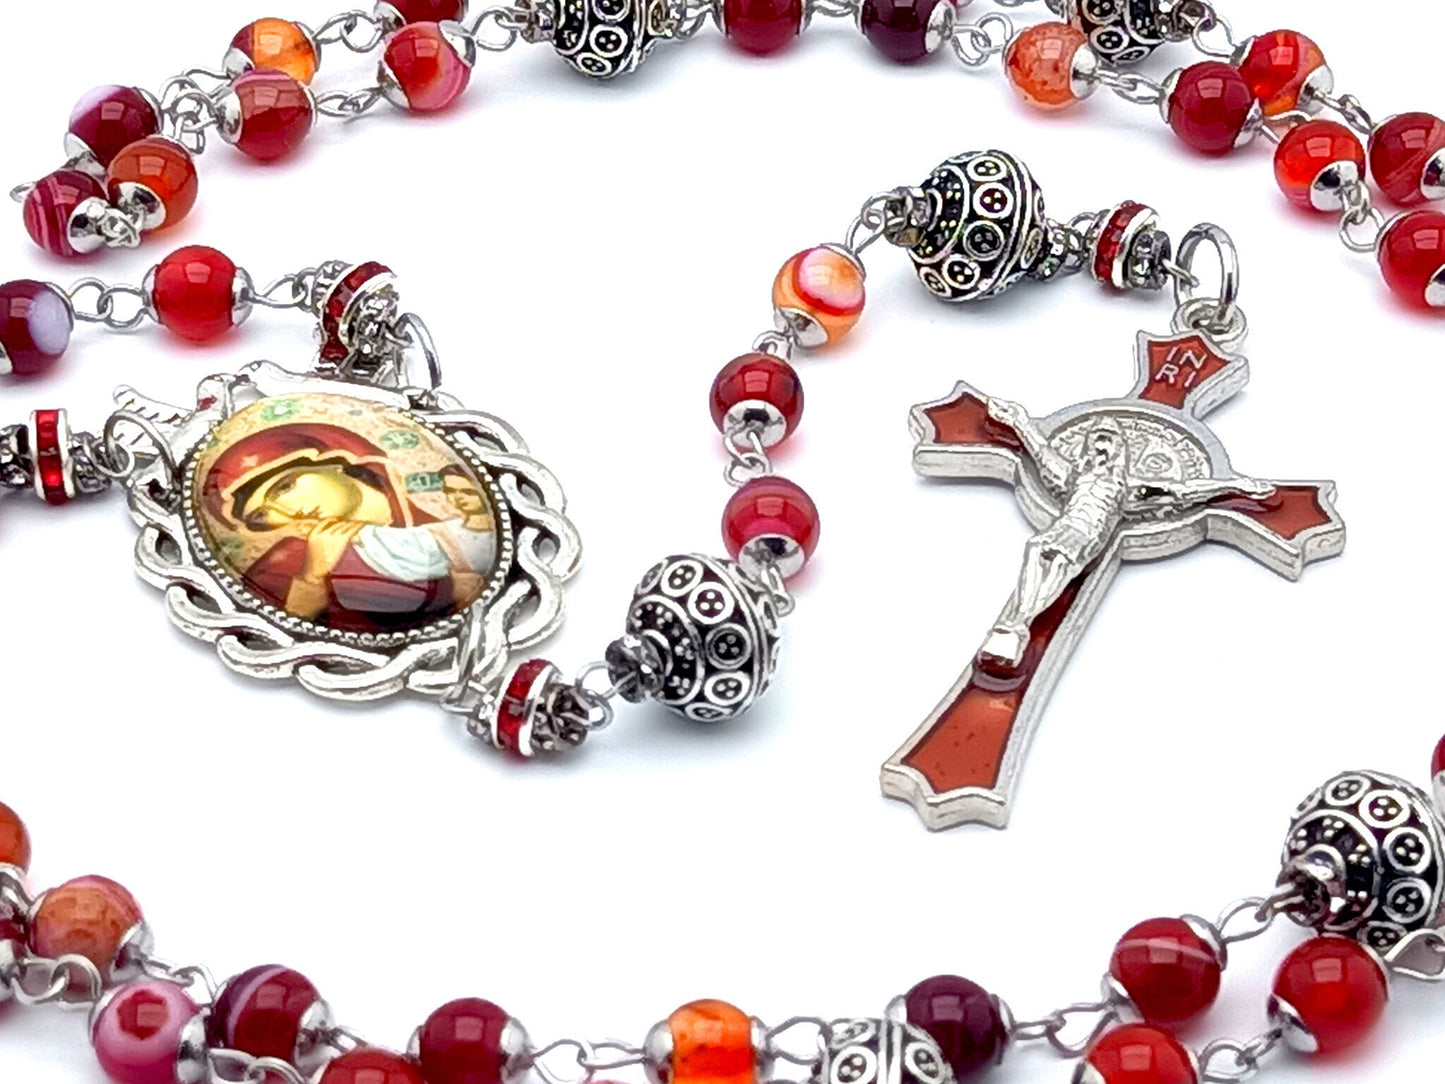 Our Lady of Perpetual Succor unique rosary beads with red striped agate gemstone and silver beads, red and silver enamel crucifix and picture centre medal.